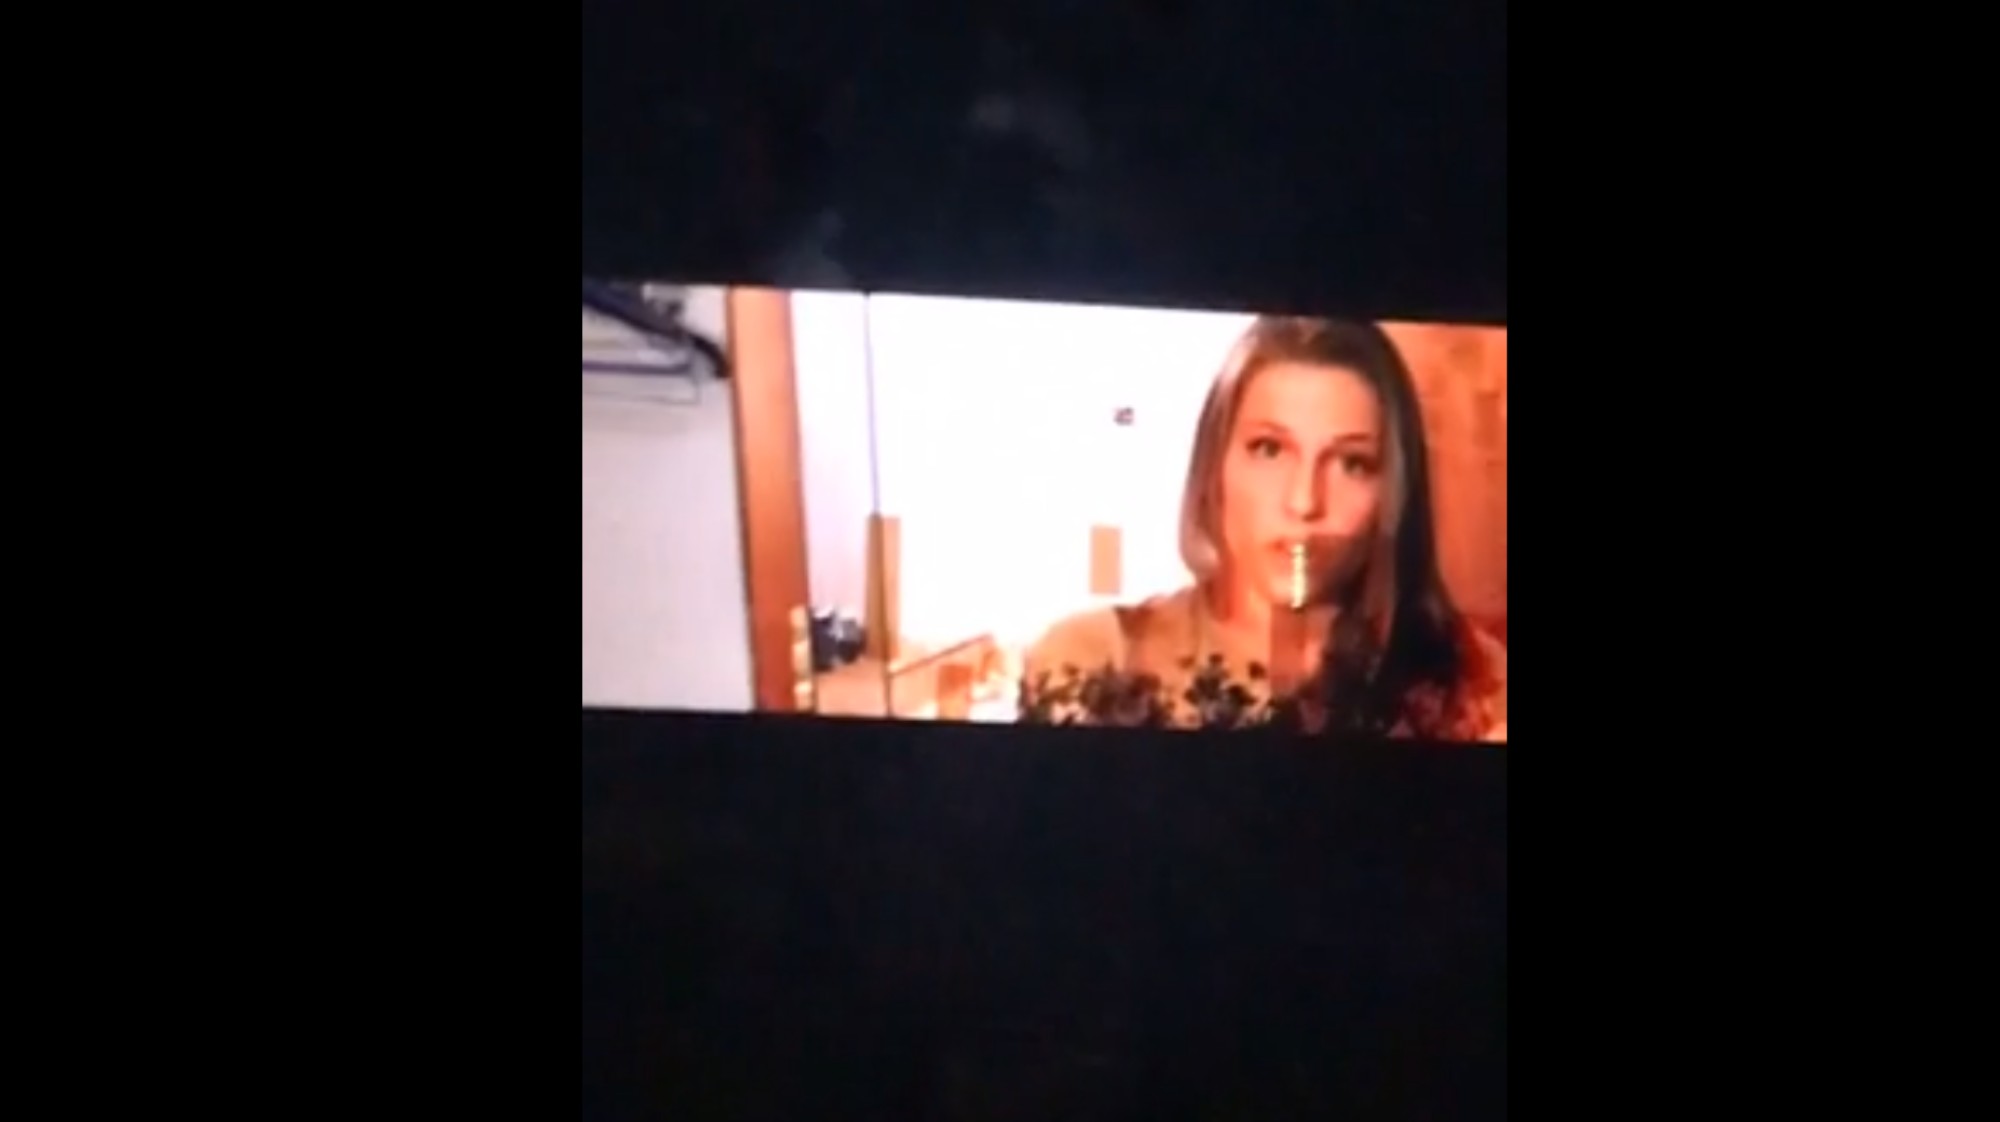 Porn Video Captures - Threesome Blowjob Scene on Giant Highway Billboard Could ...